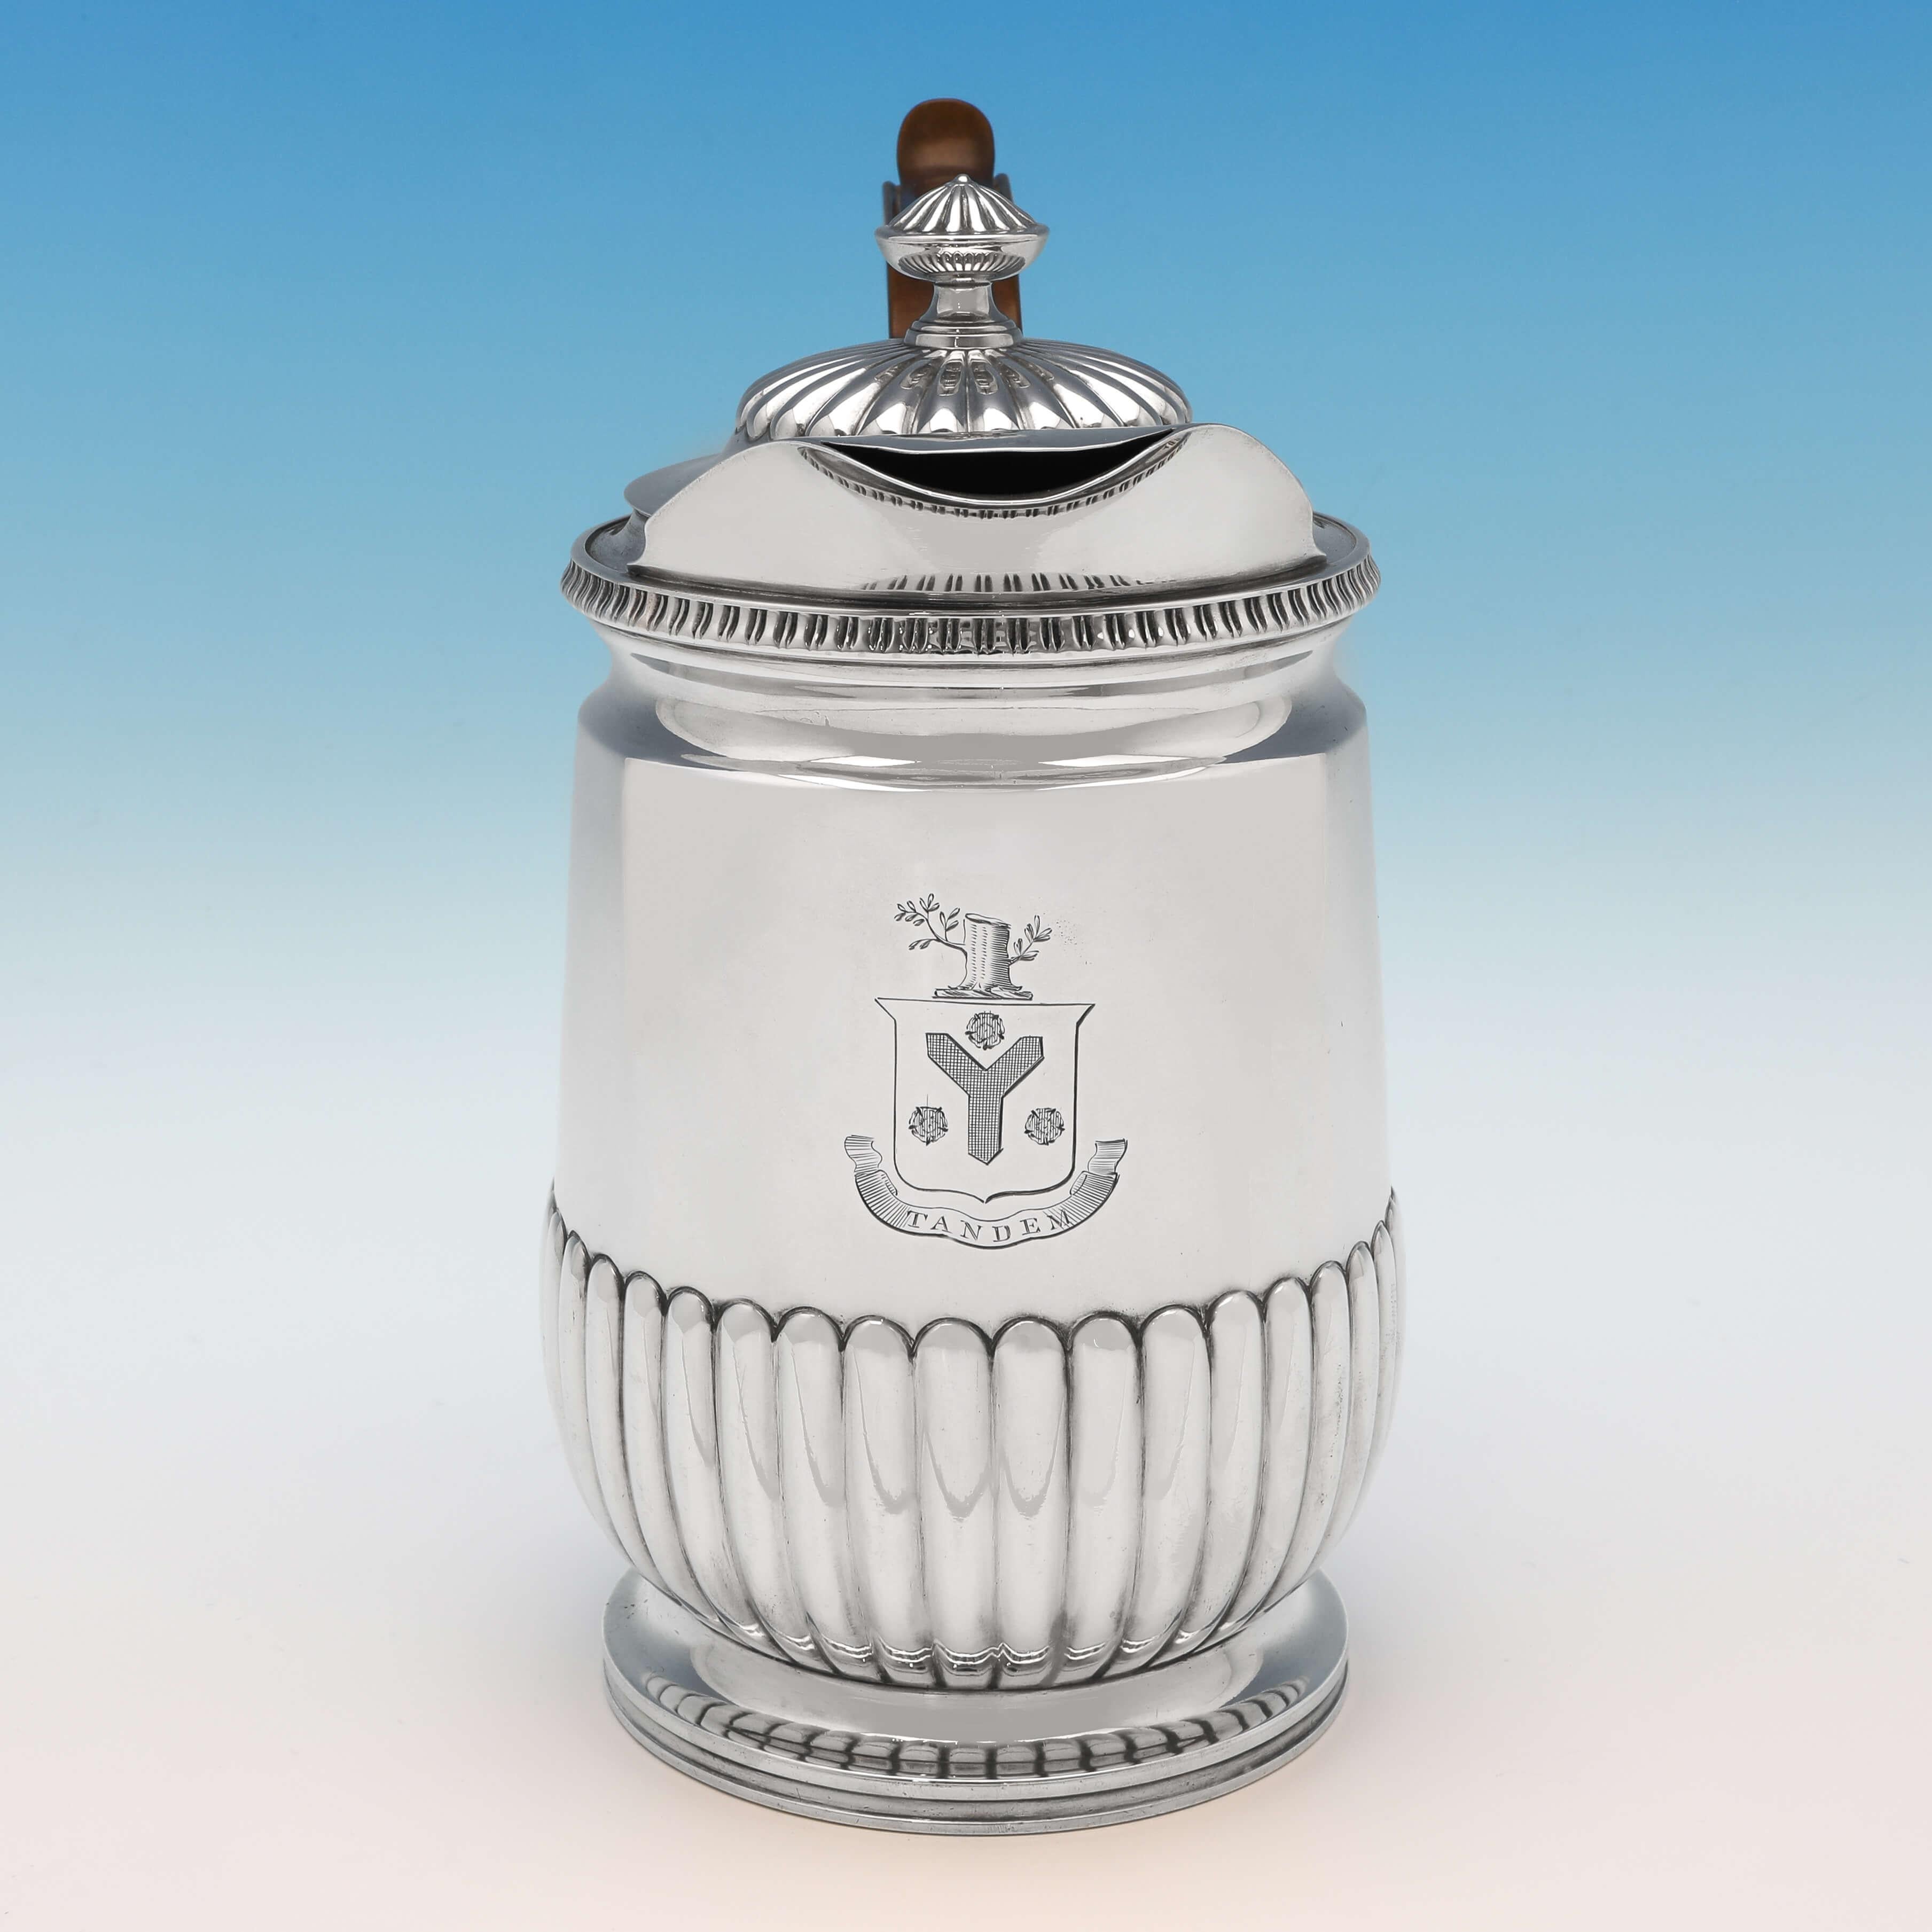 Hallmarked in Birmingham in 1811 by Matthew Boulton, this handsome, Regency period, antique sterling silver water jug, features half fluted decoration to the body and lid, an egg and dart border, a wooden handle, and an engraved crest and motto to